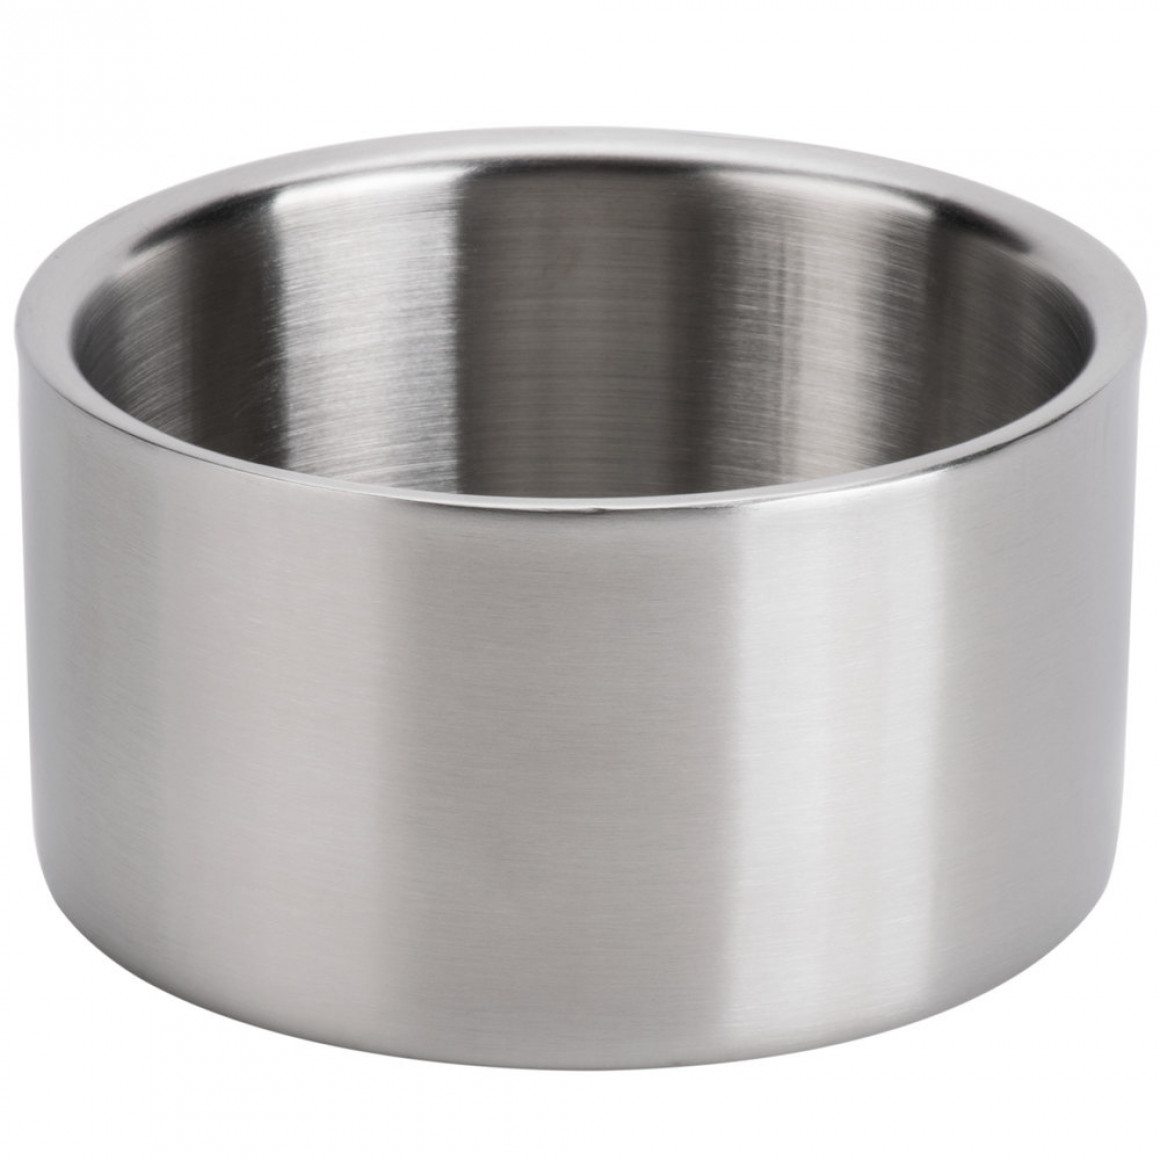 STAINLESS STEEL, SATIN BOWL, DOUBLE WALL, 17 OZ.